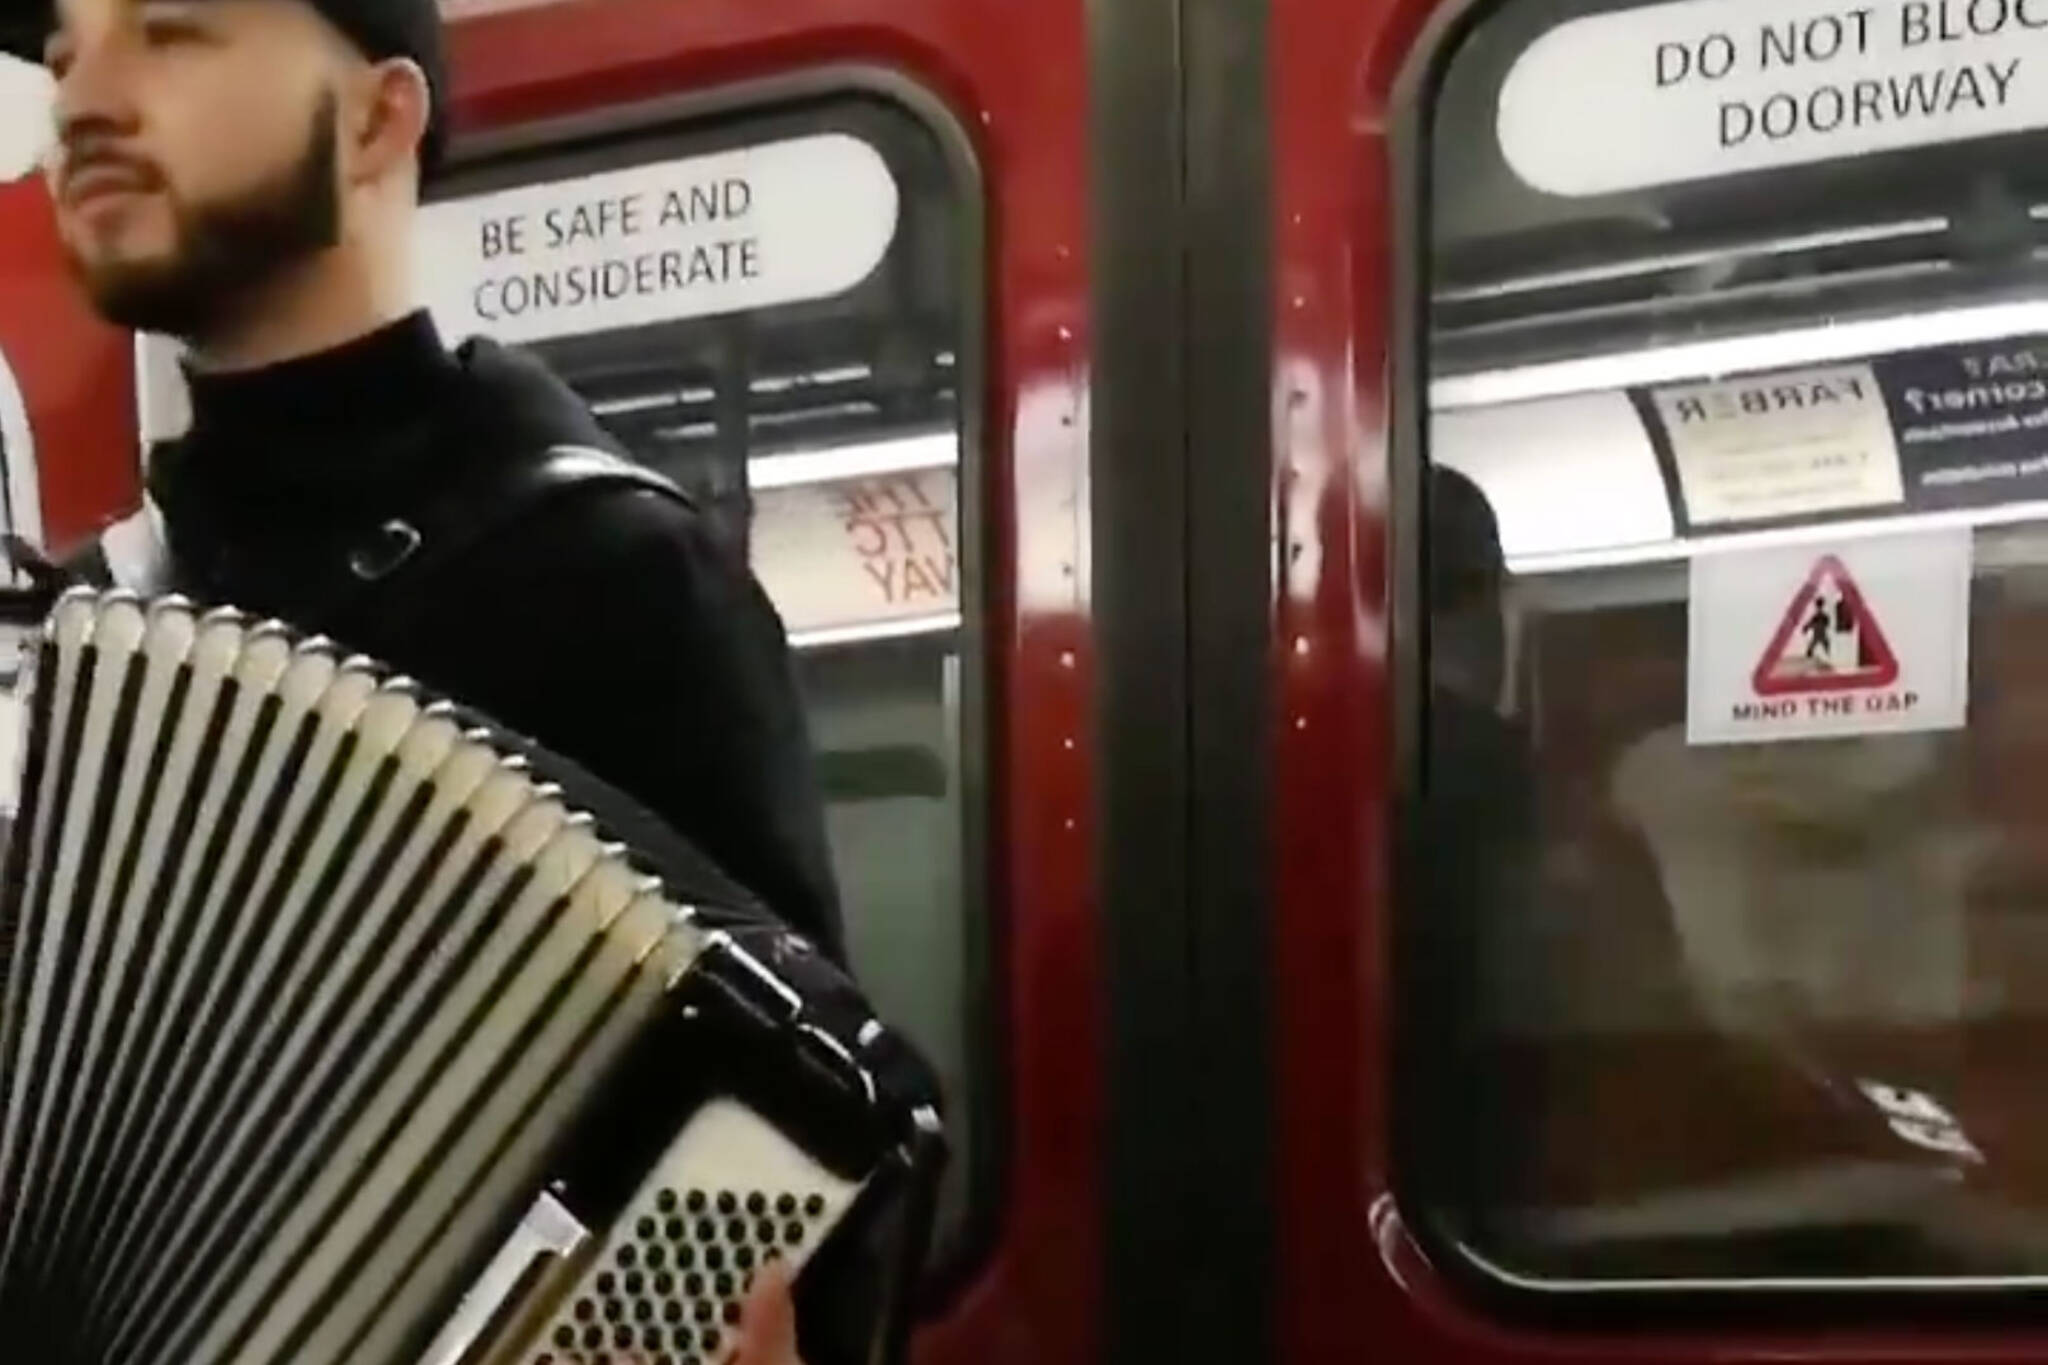 The Ttc Just Busted The Guy Who Plays Despacito On The Subway